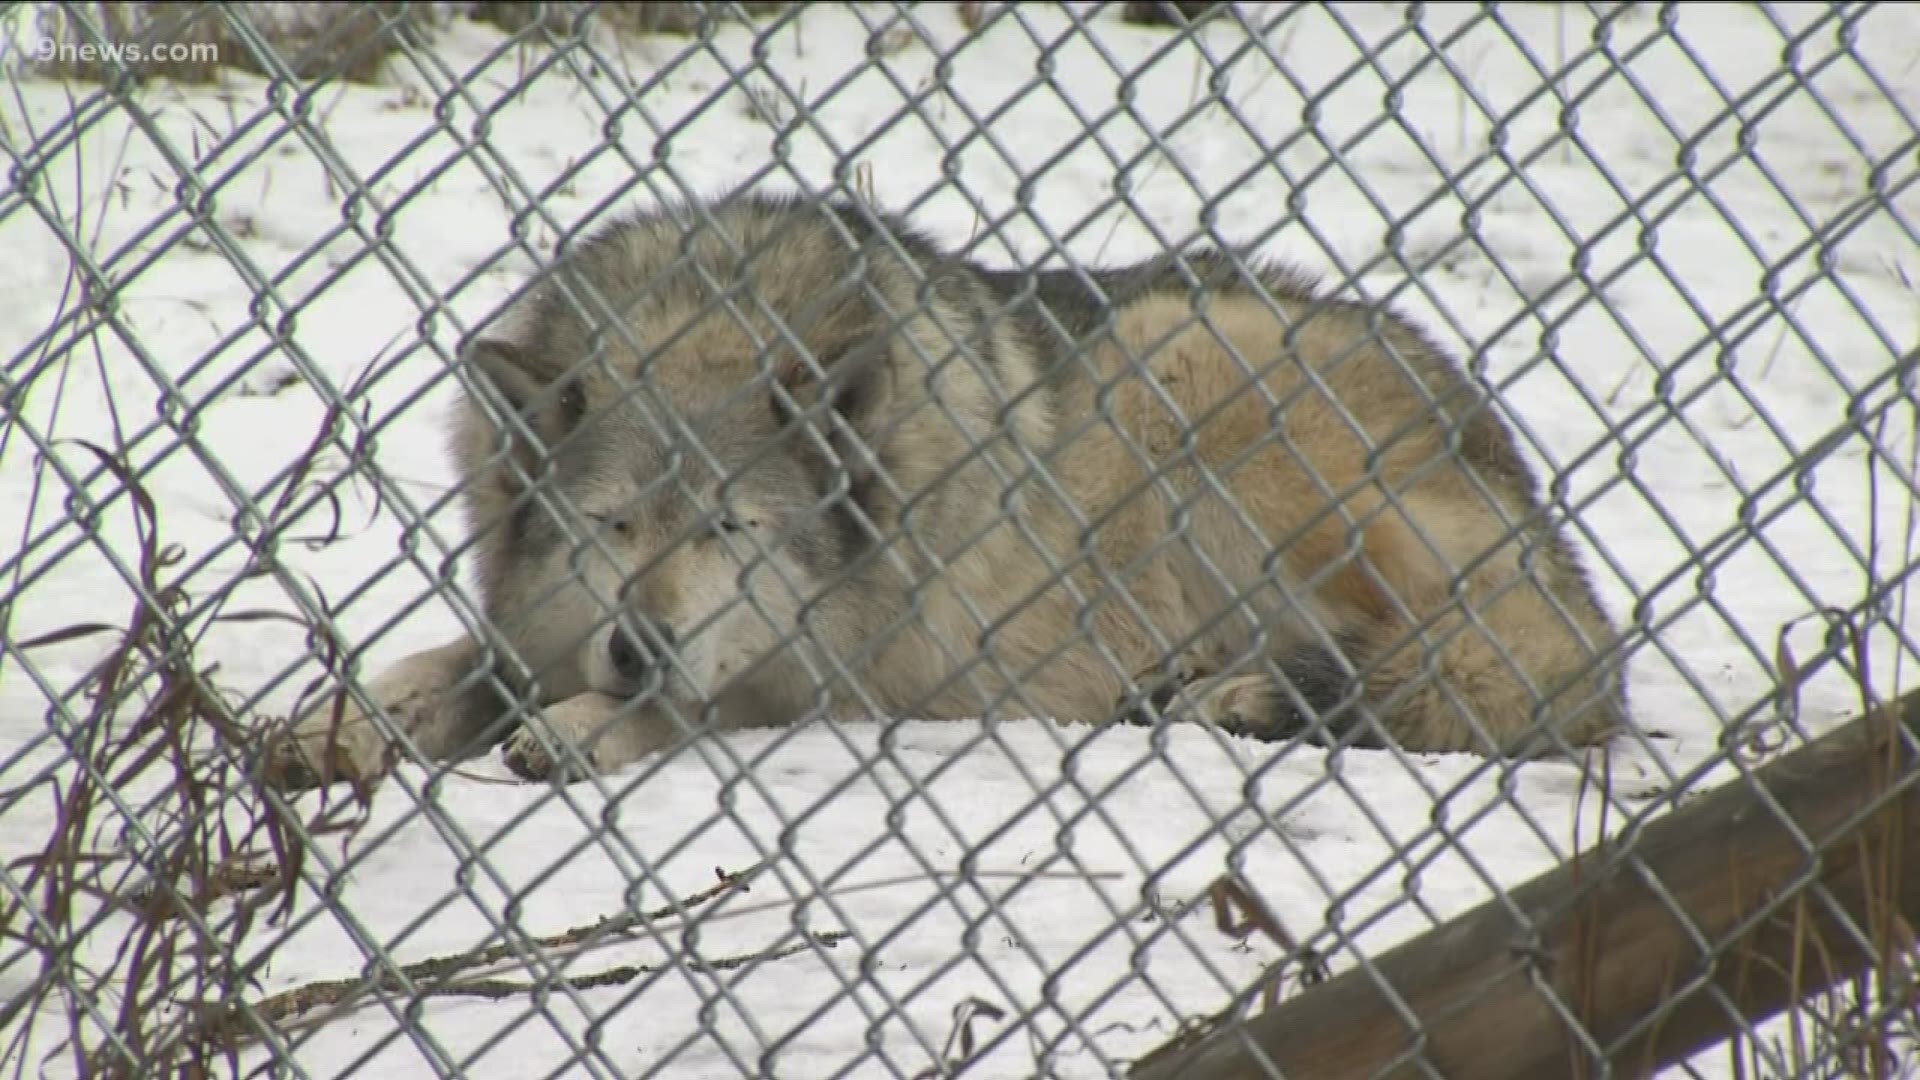 State wildlife officials say they are reluctant to re-introduce them. Activists say they want the public to decide.